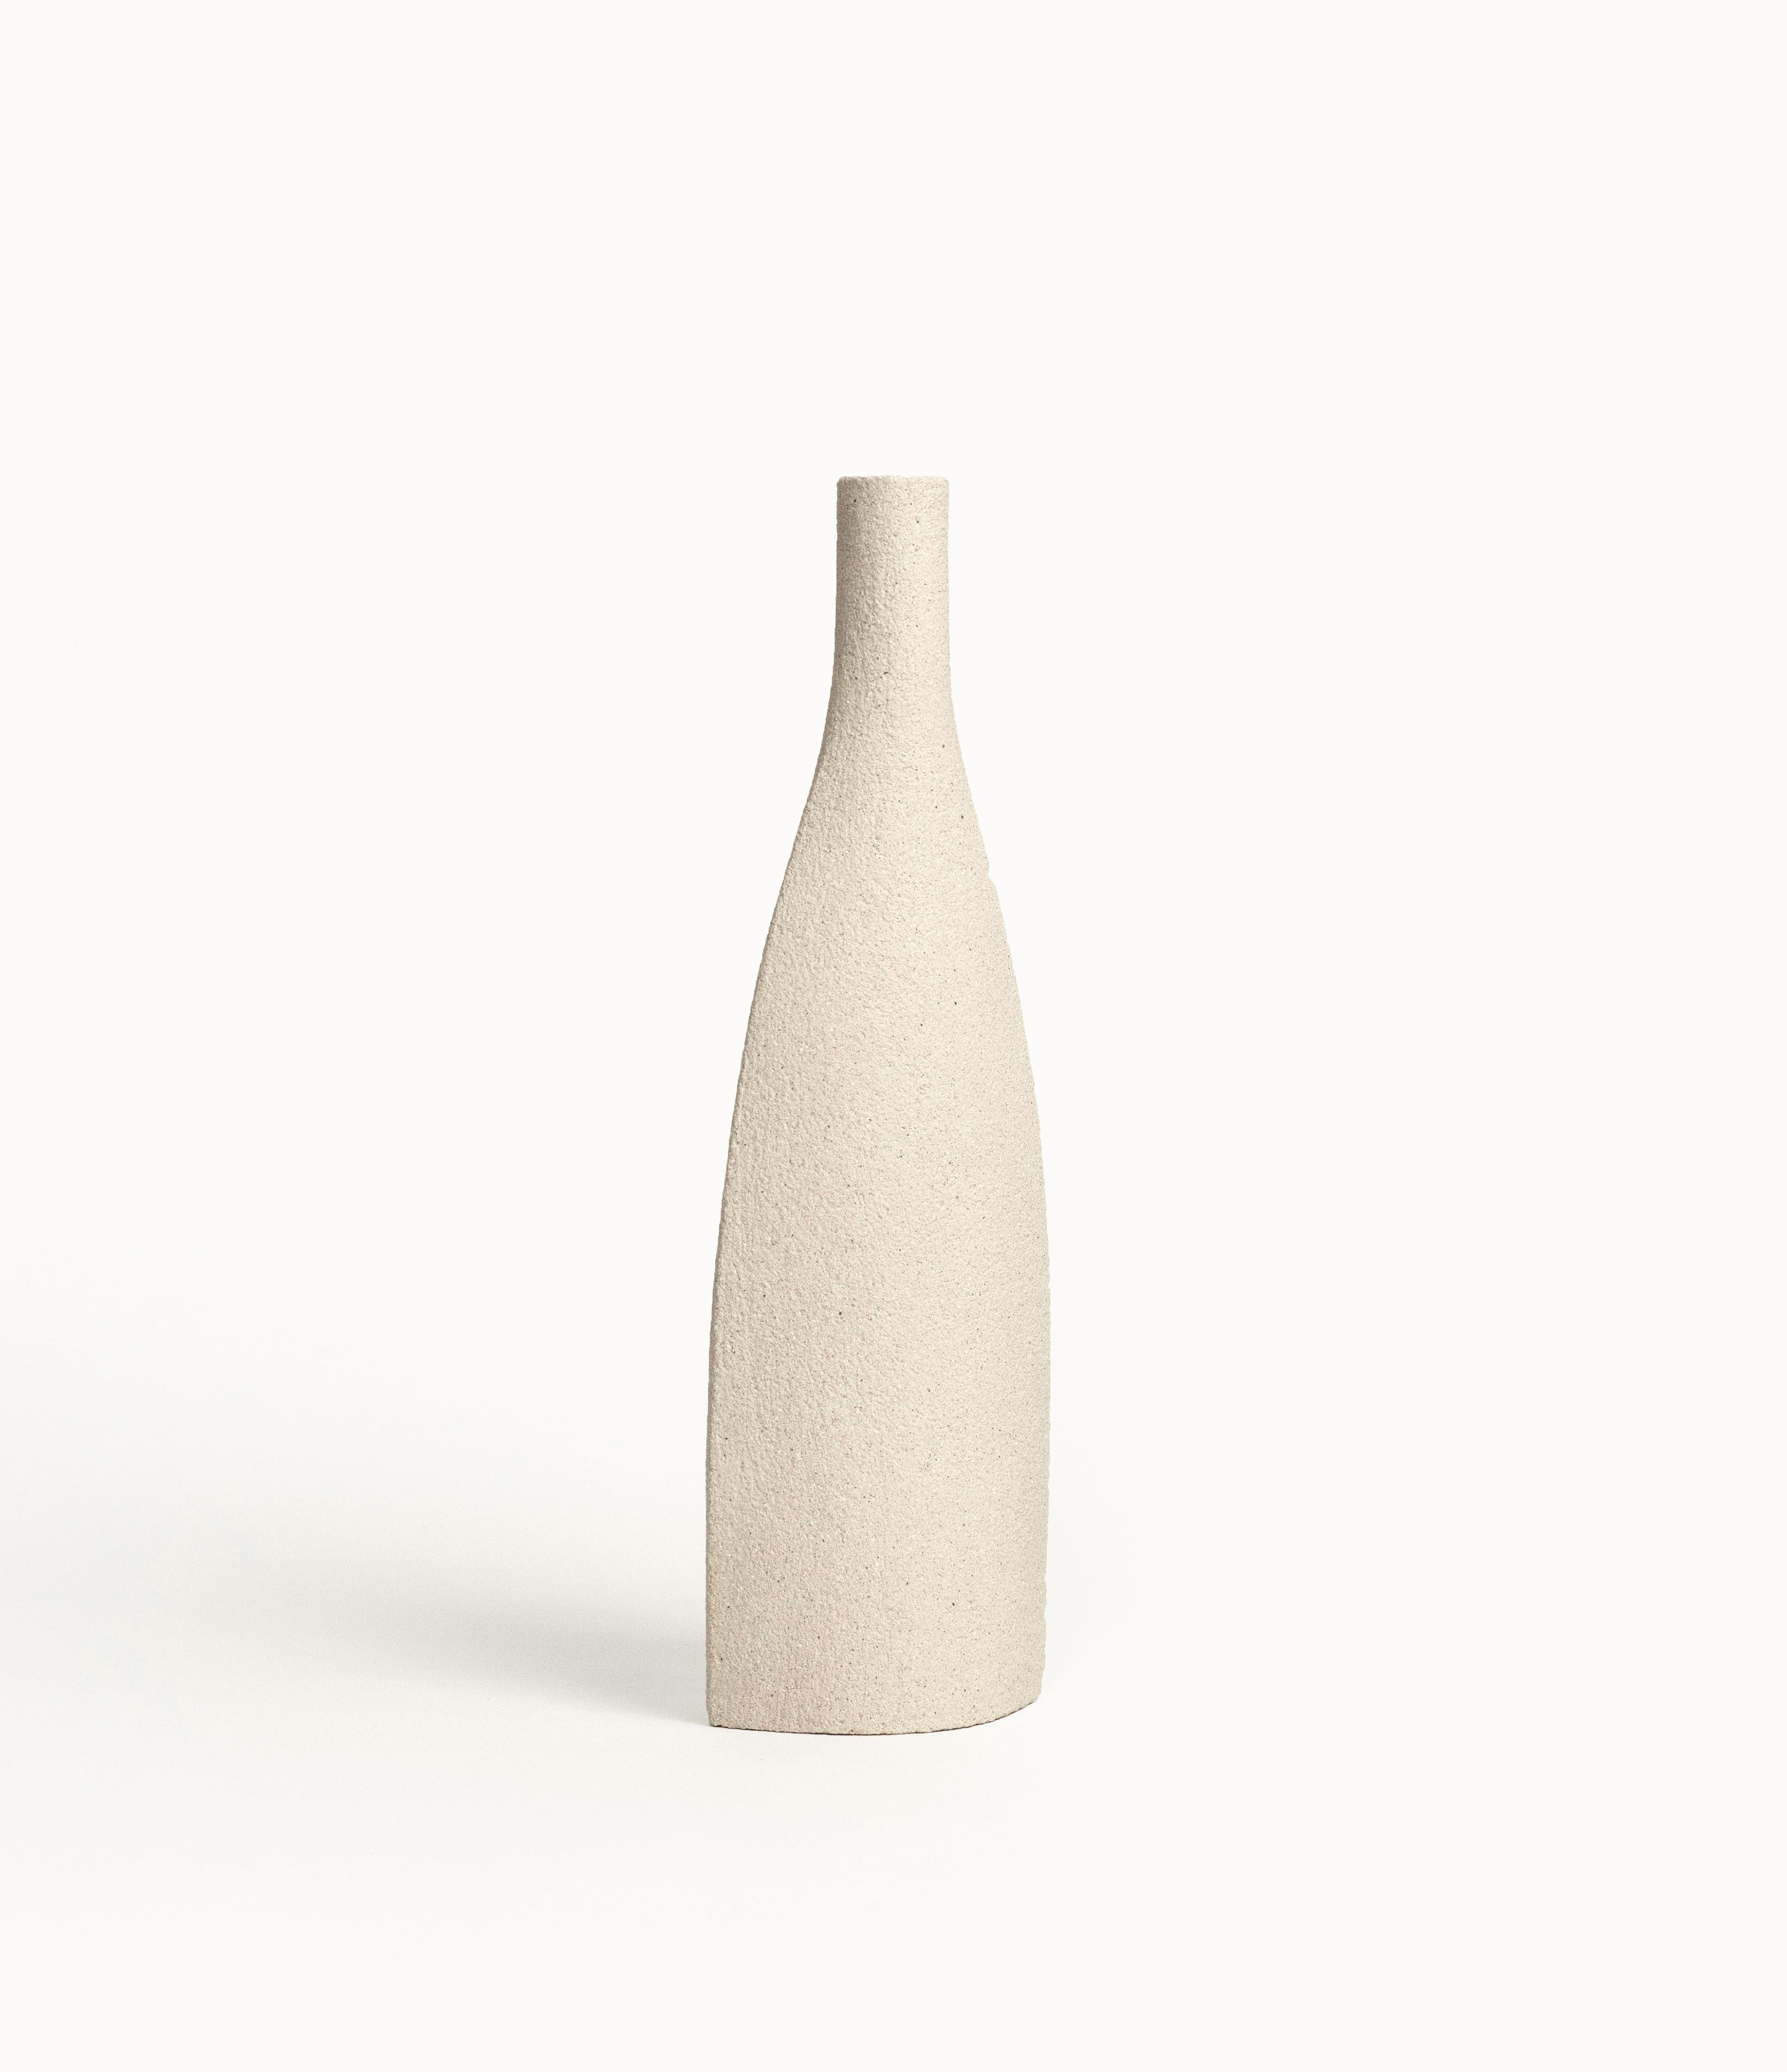 Bouteille [M] - White

Hand-crafted in our studio in France.

H: 28 CM / L: 10 CM
H: 11 INCH / L: 4 INCH.

- Stoneware fired at high temperature finished with transparent glossy glaze inside.
- Raw exterior showcasing the natural aspect of